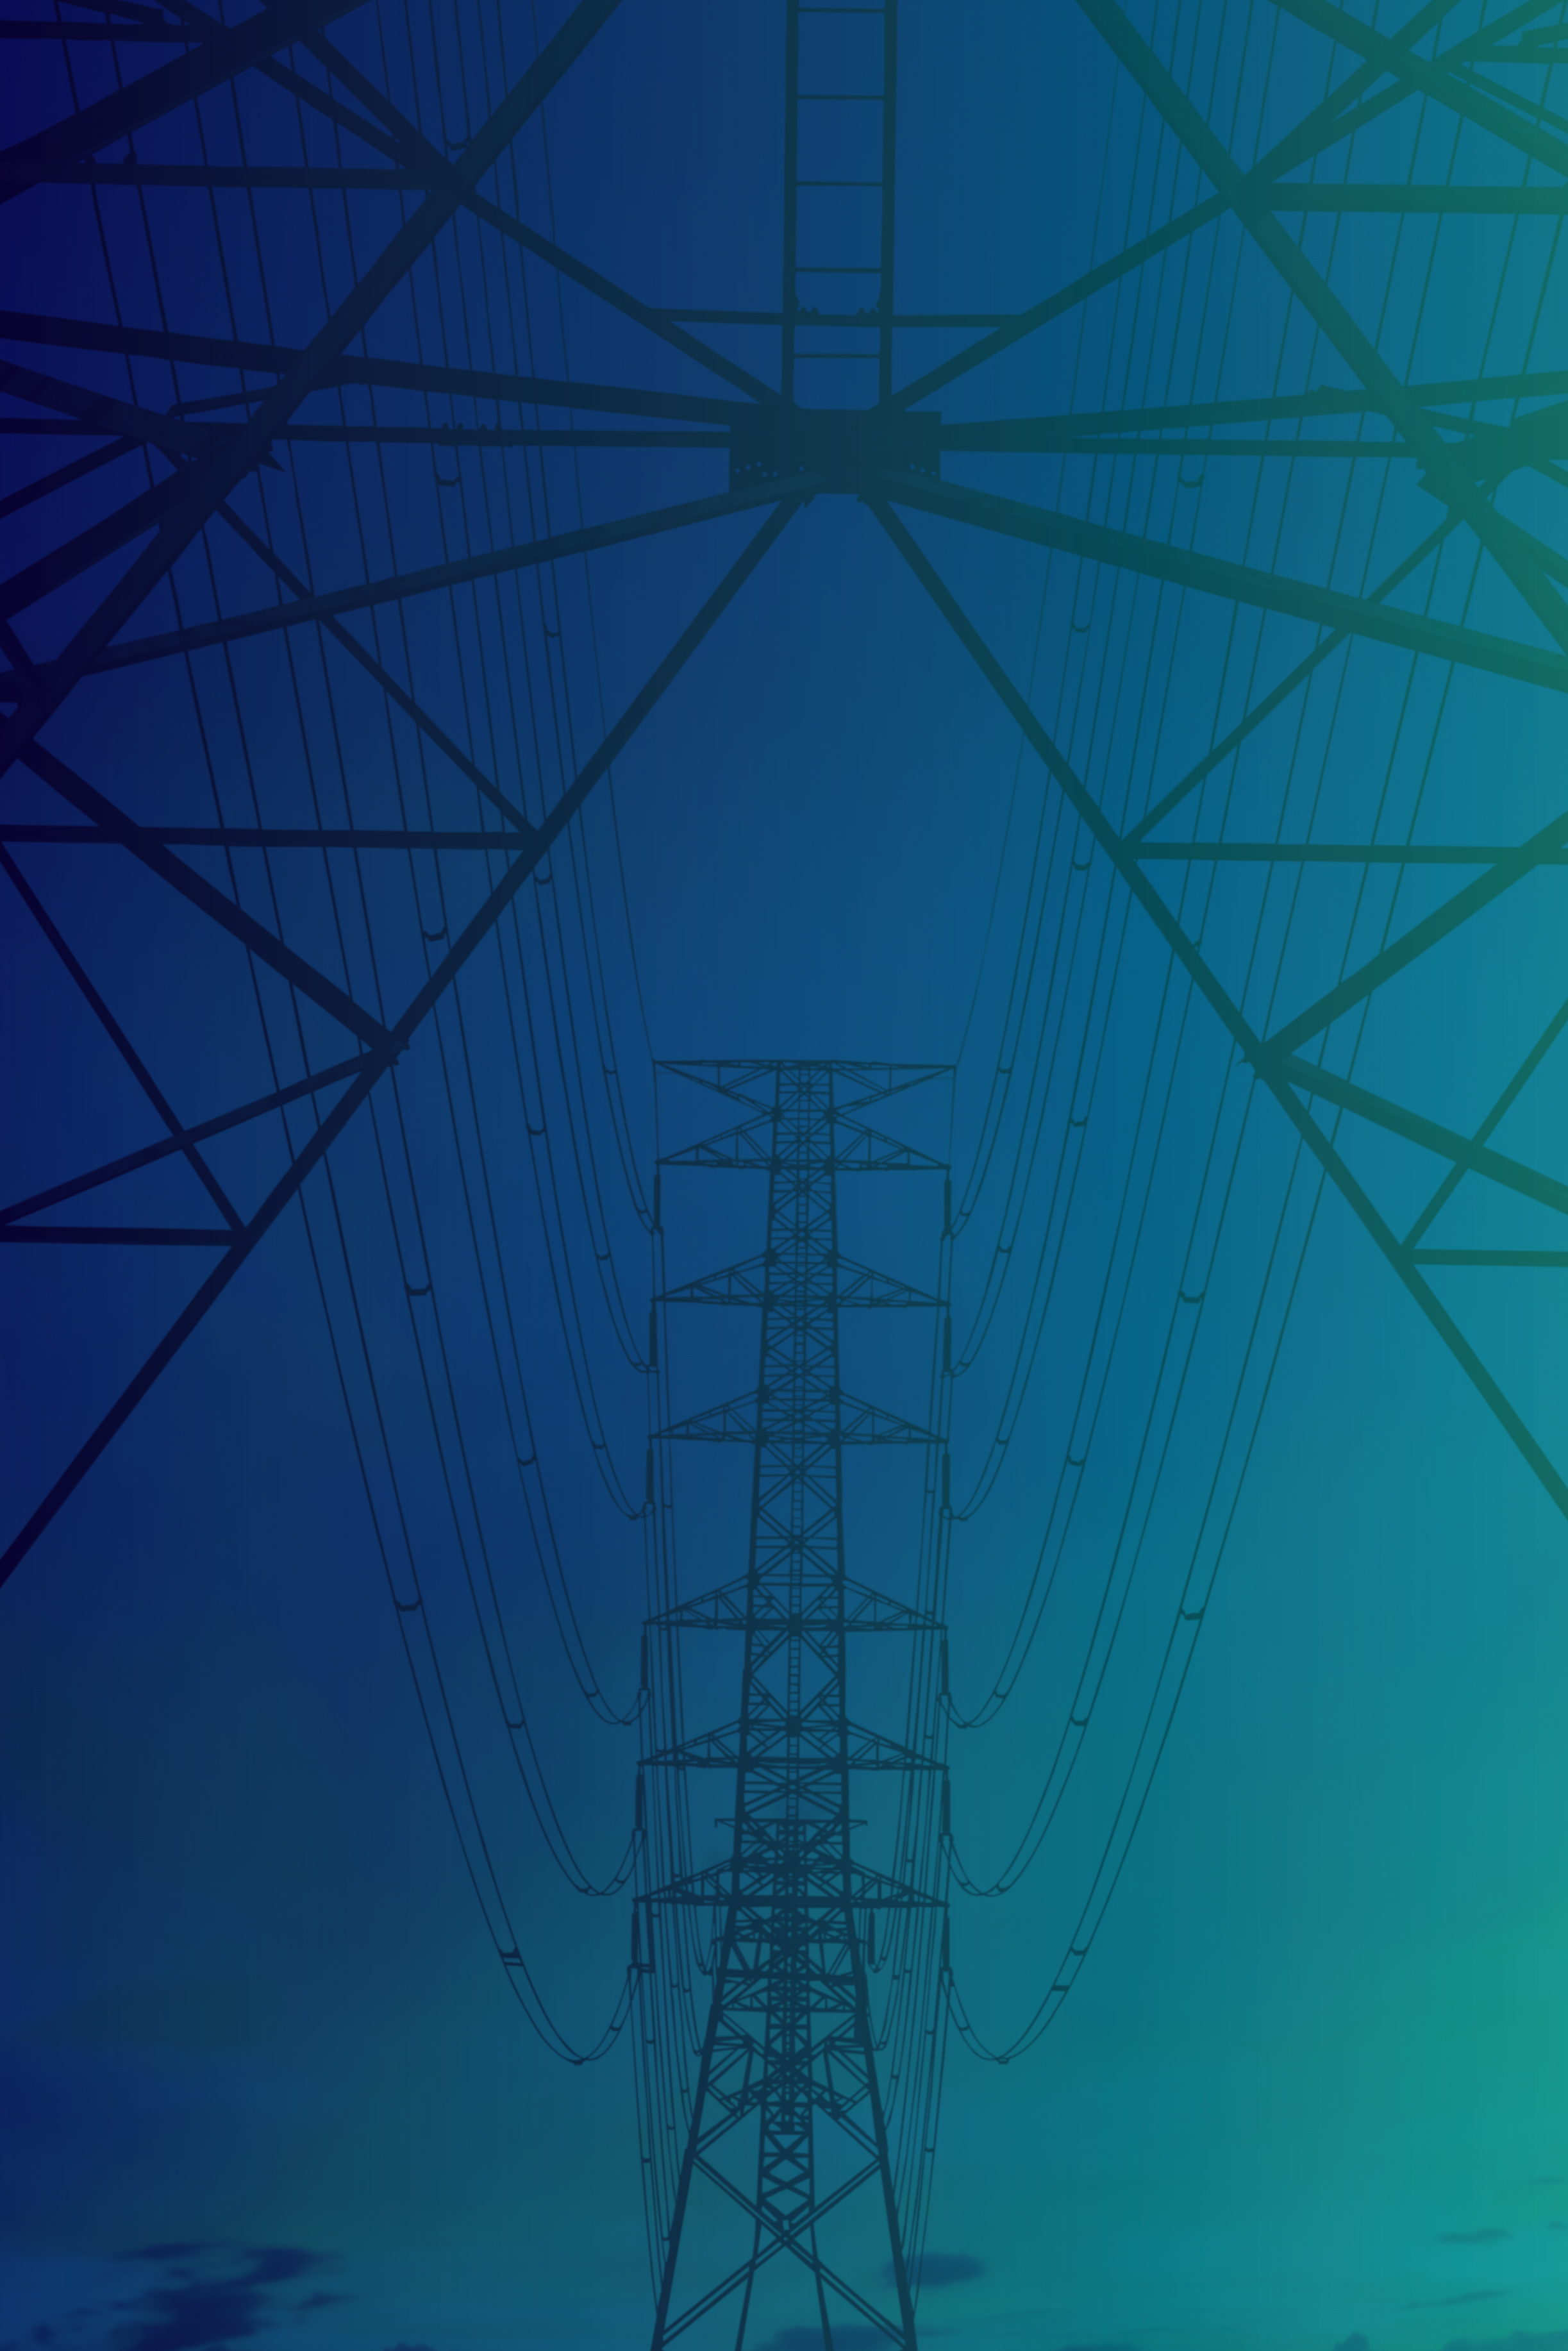 close up view of power line tower on a gradient background of dark teal to lighter teal